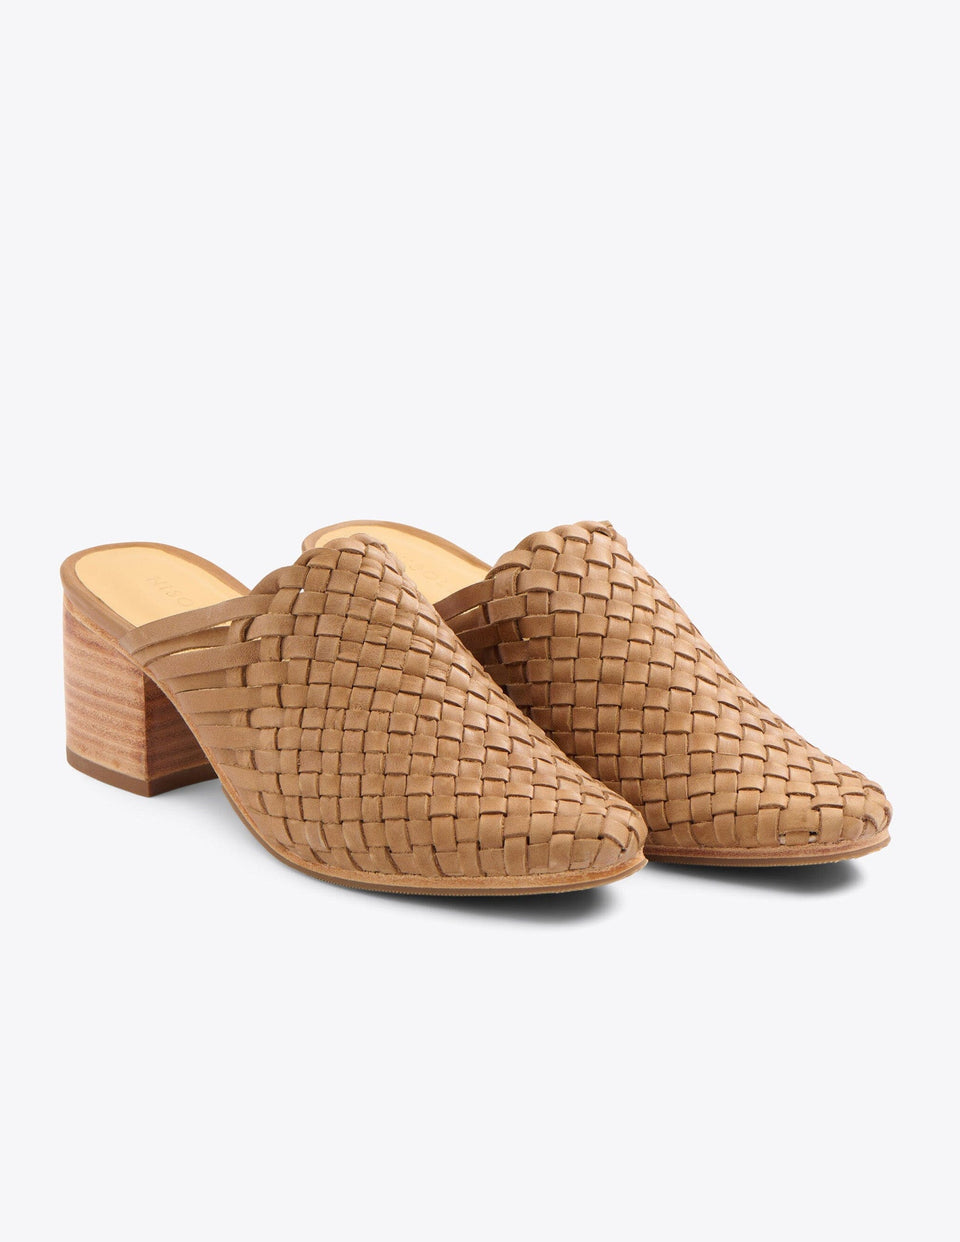 All-Day Woven Heeled Mule - Almond